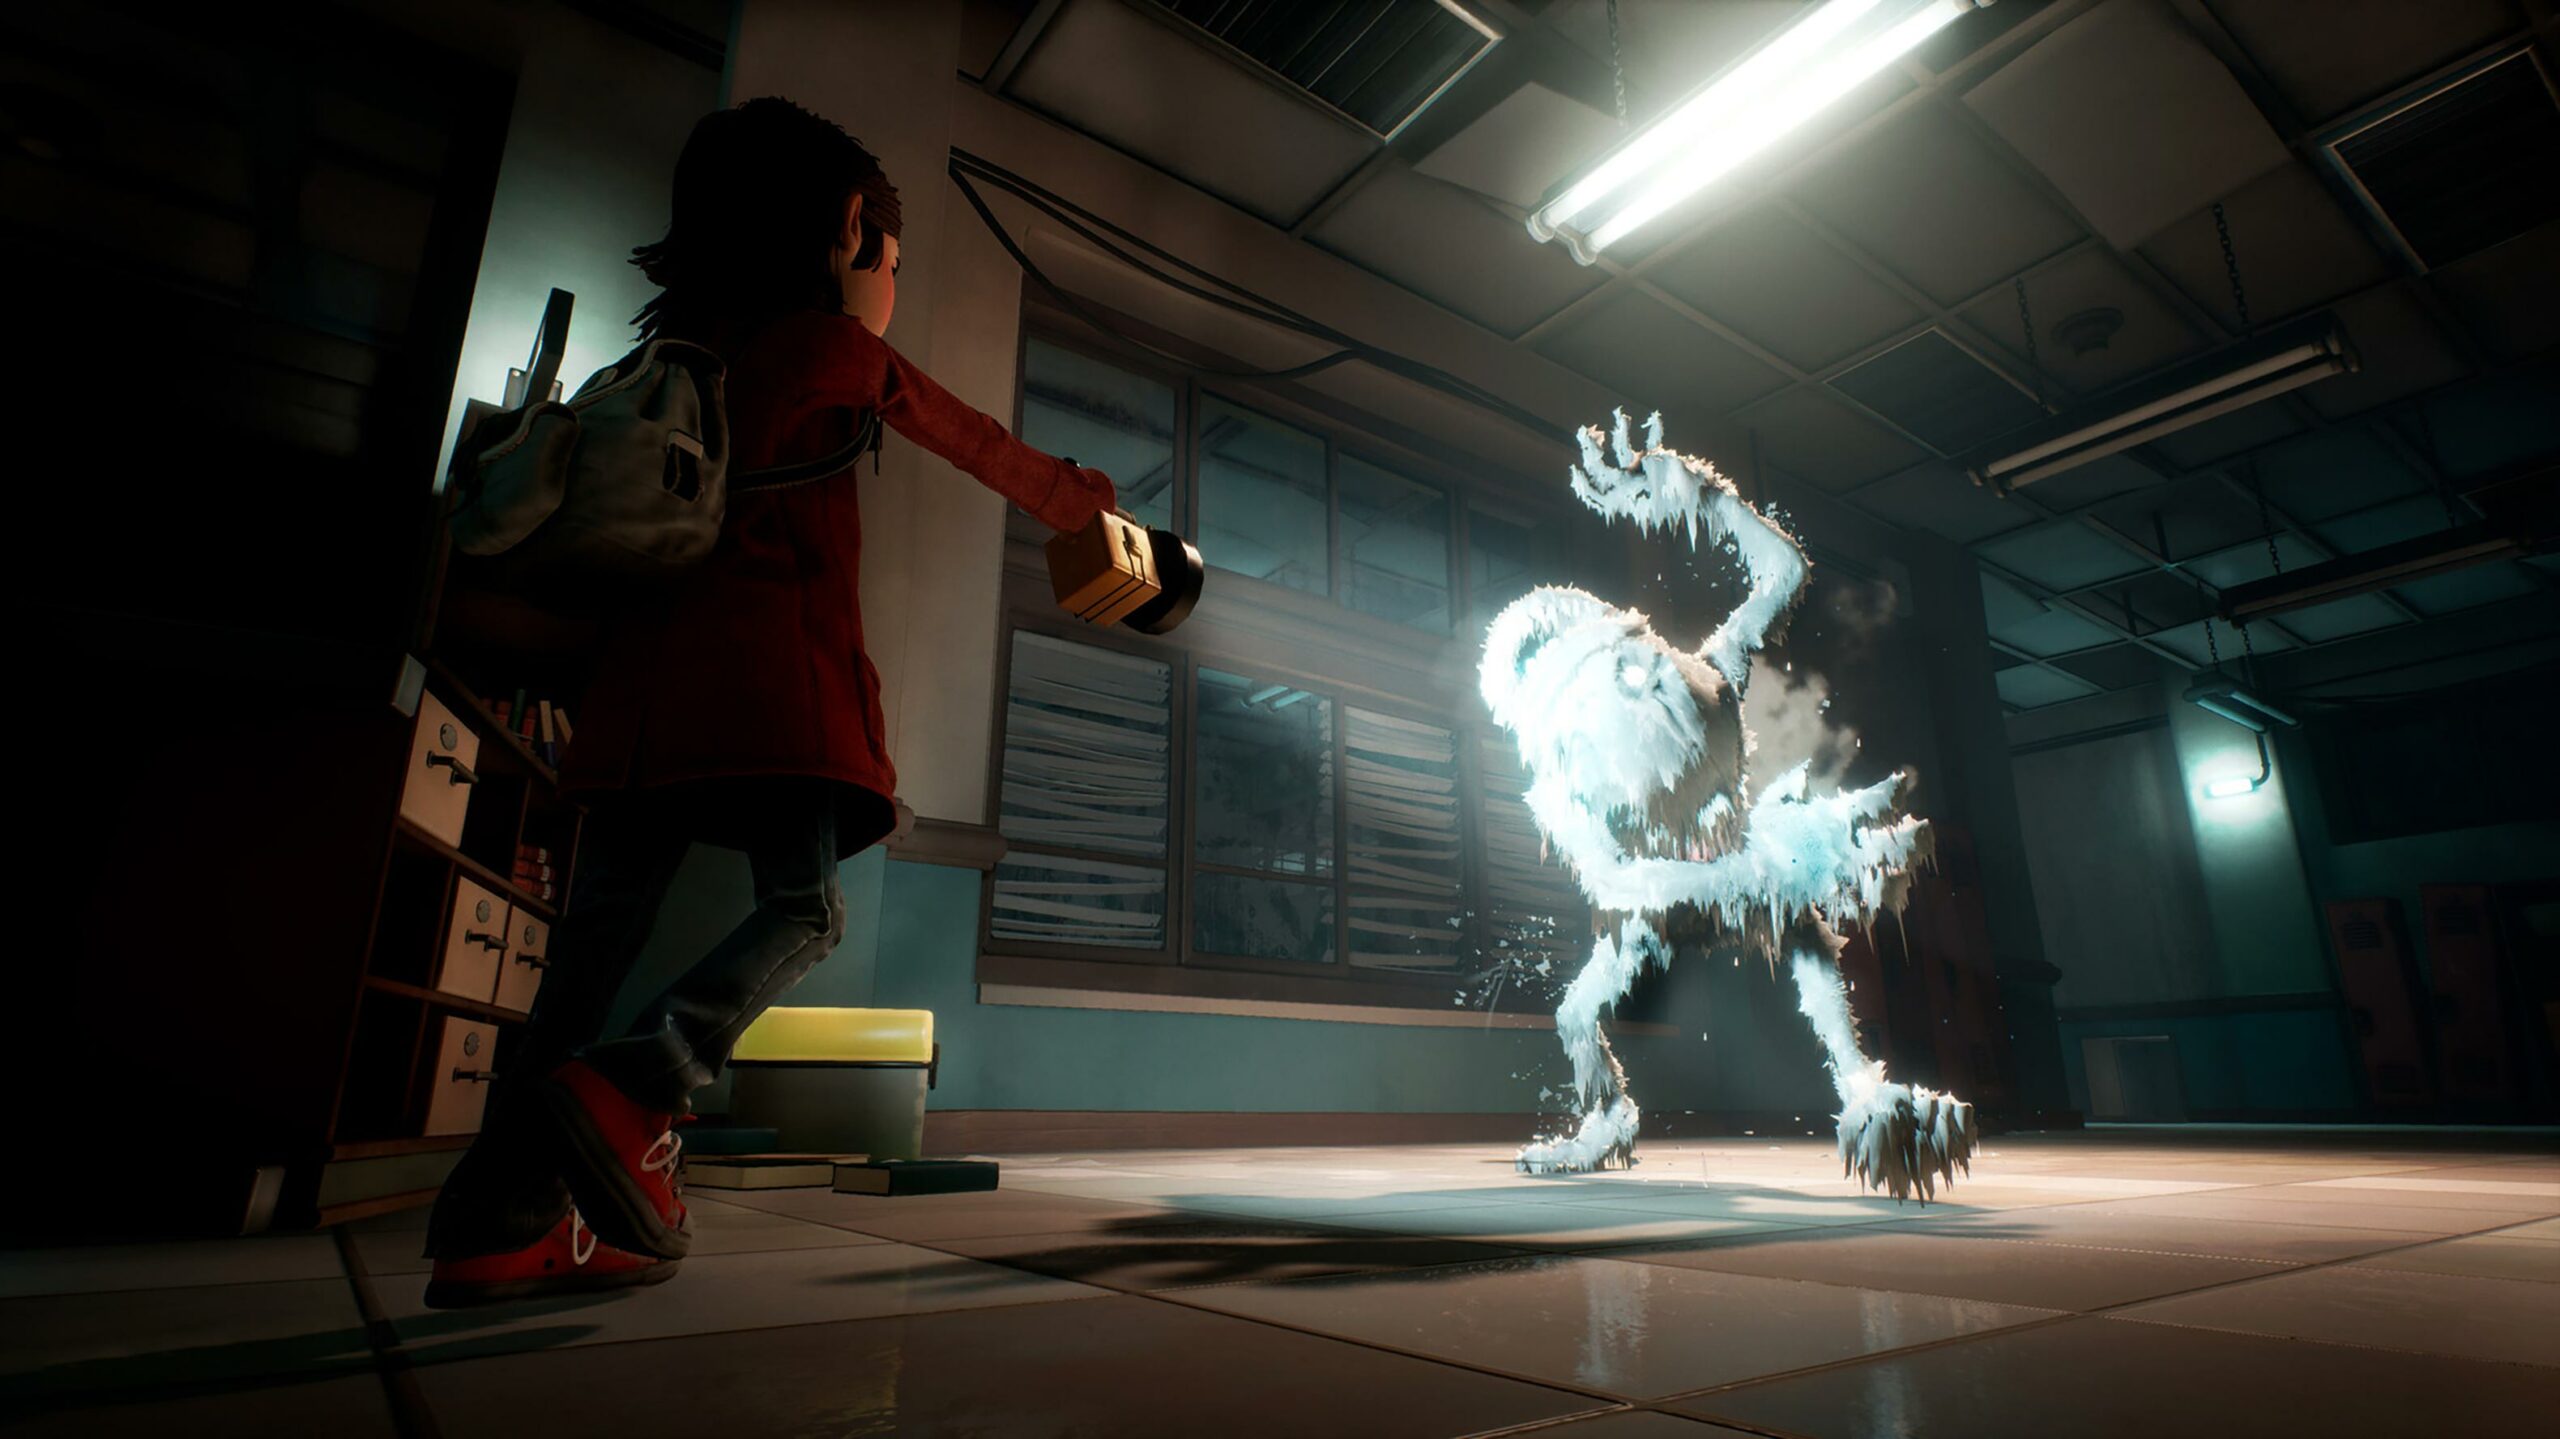 In the game Gylt, a teenage girl is shining her flashlight on a creature to freeze it.